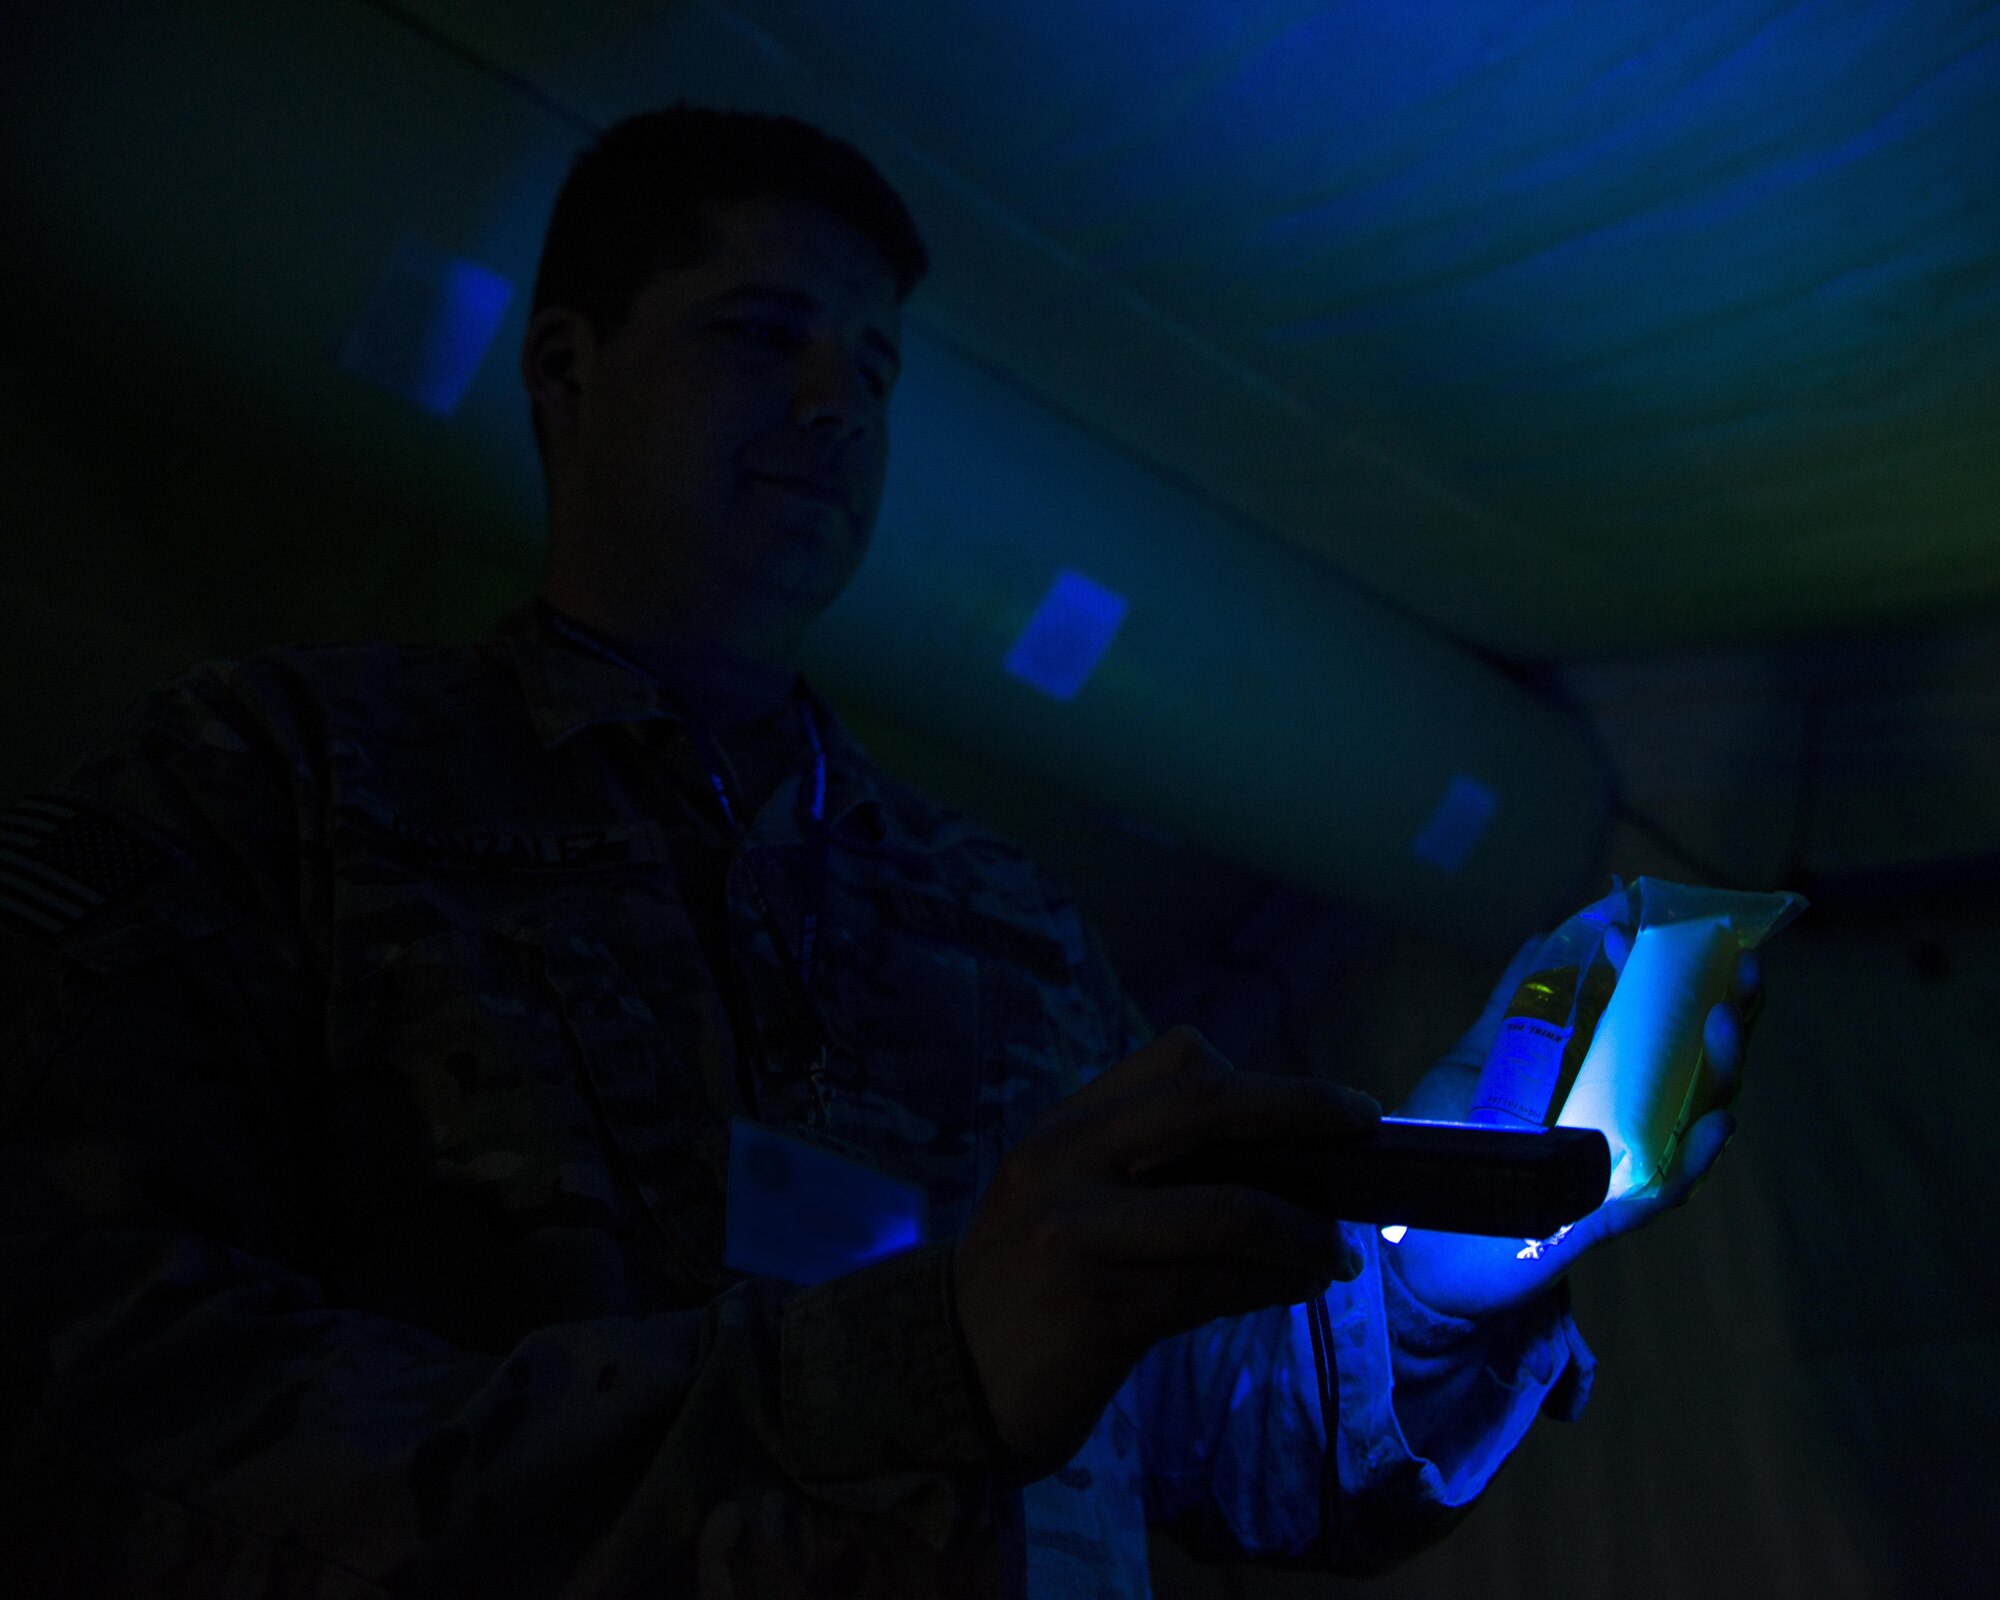 An Independent Duty Medical Technician from the 352d Special Operations Support Squadron tests water samples in Powidz, Poland during TROJAN FOOTPRINT 16, May 18, 2016. Large-scale exercises, such as TF16, require medical personnel to evaluate the working environment both before and during a deployment to maintain the quality of life of assigned personnel. (U.S. Air Force photo by 1st Lt. Chris Sullivan/Released)